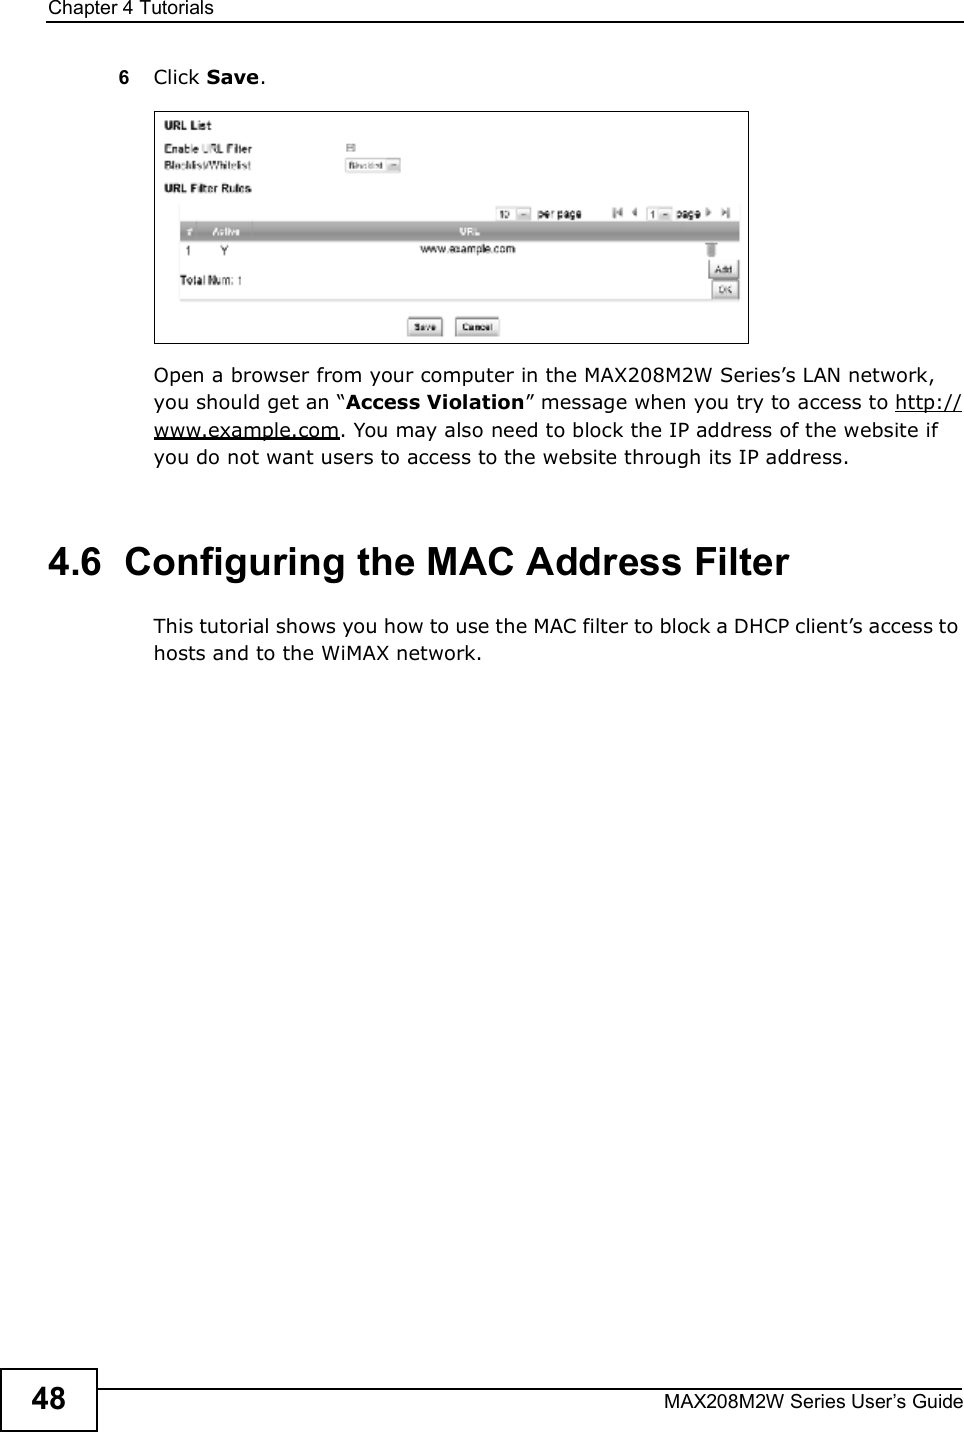 Chapter 4TutorialsMAX208M2W Series User s Guide486Click Save.Open a browser from your computer in the MAX208M2W Series s LAN network, you should get an &quot;Access Violation# message when you try to access to http://www.example.com. You may also need to block the IP address of the website if you do not want users to access to the website through its IP address.4.6  Configuring the MAC Address FilterThis tutorial shows you how to use the MAC filter to block a DHCP client s access to hosts and to the WiMAX network.